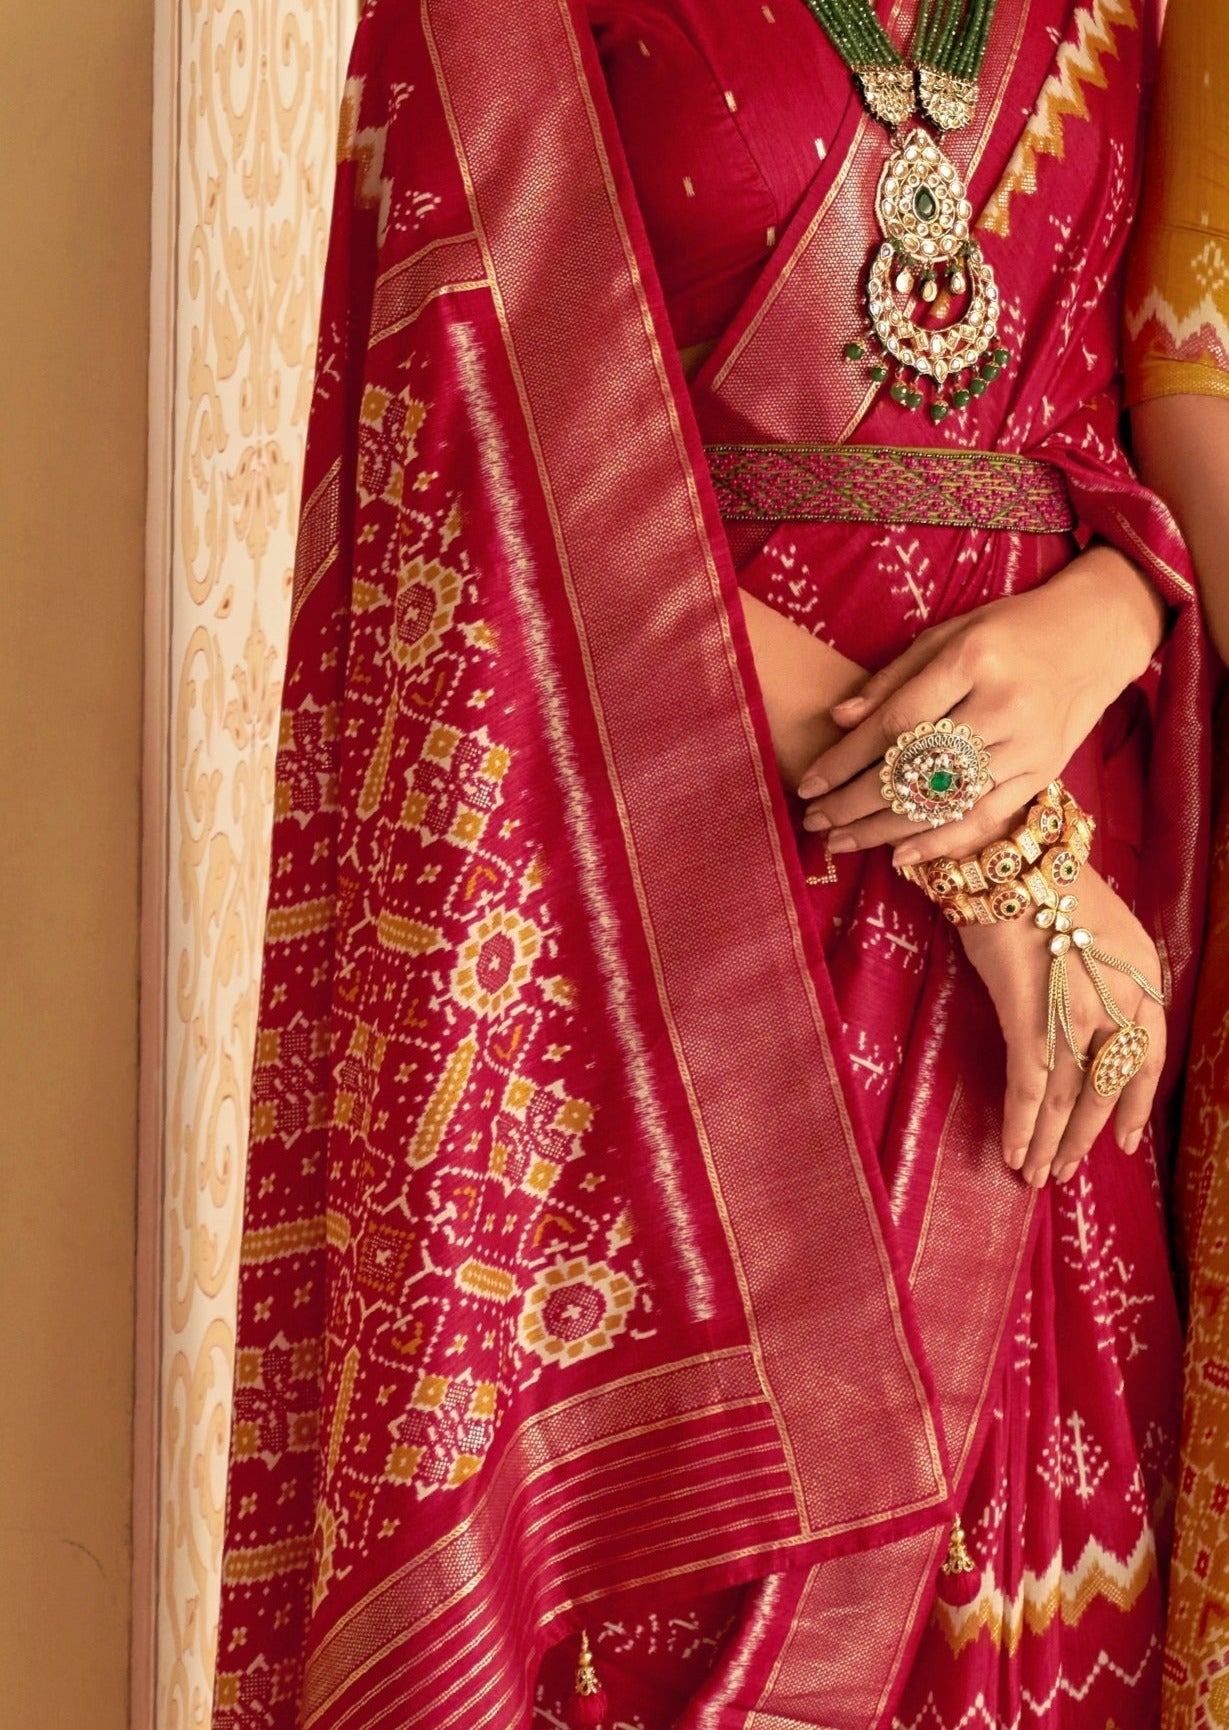 Patola silk red color double ikkat saree online shopping price in india.